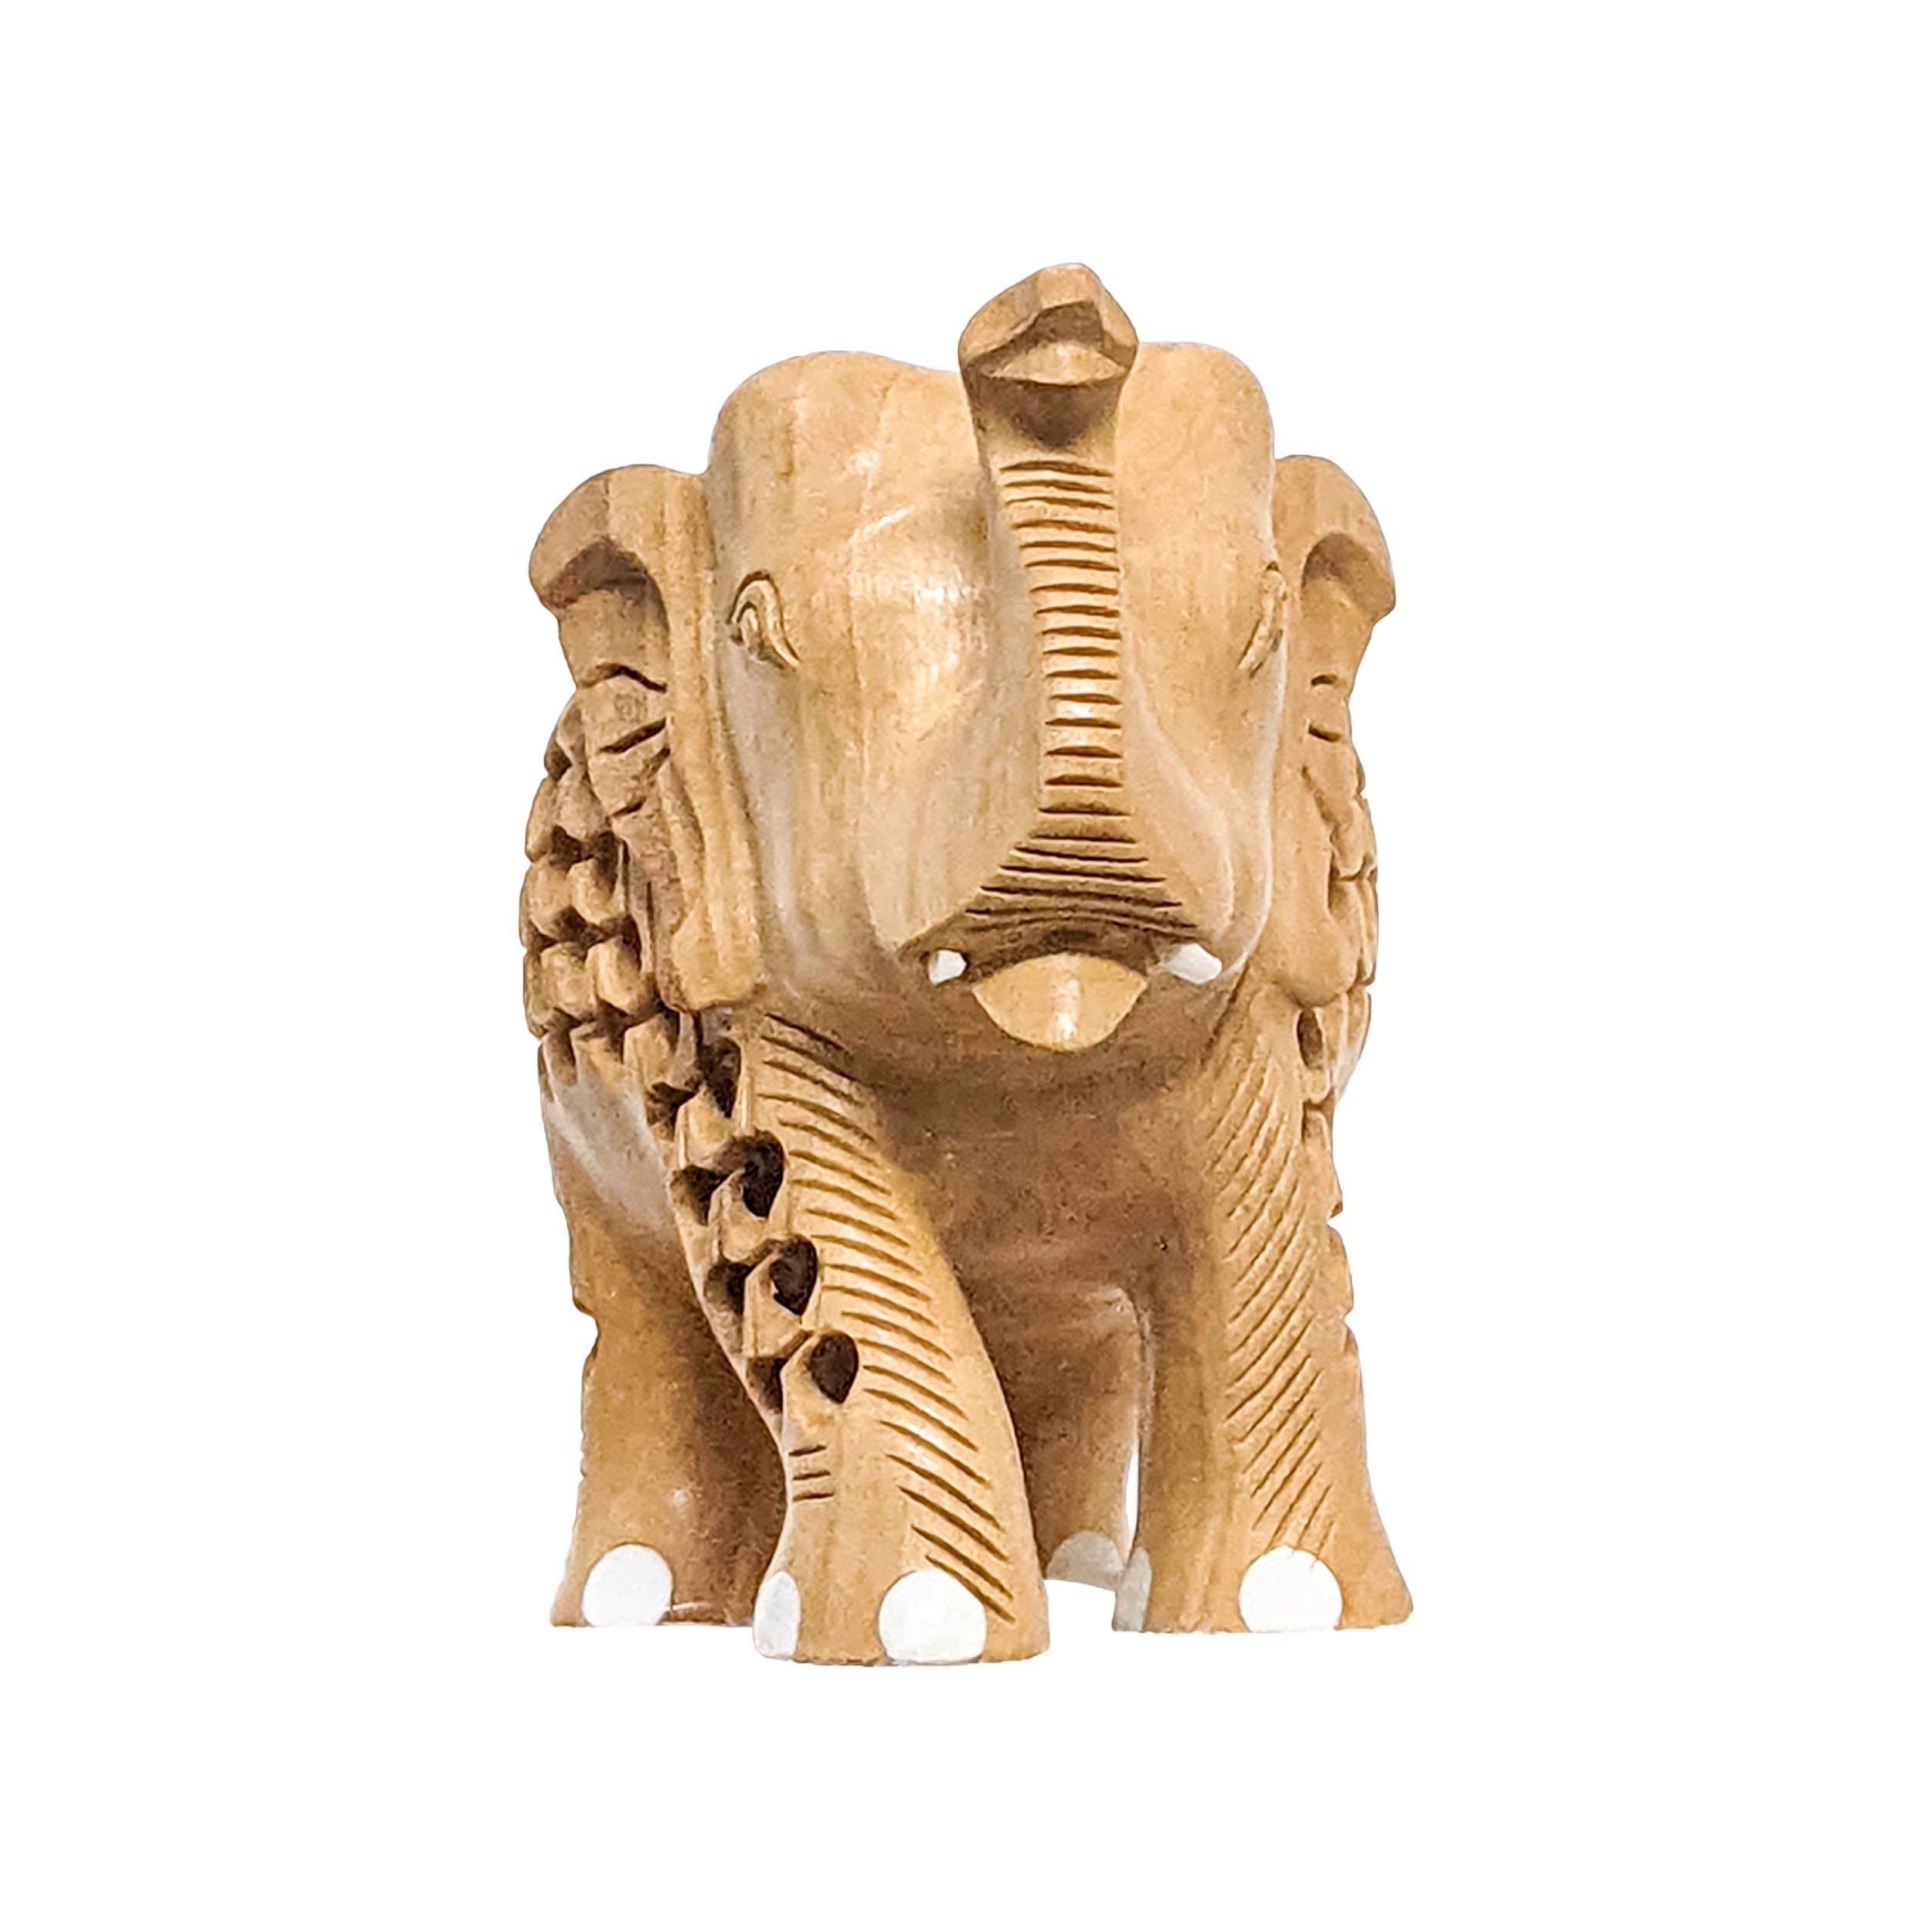 Wooden Handcrafted Simple Jali Elephant Sculpture (5 Inches)